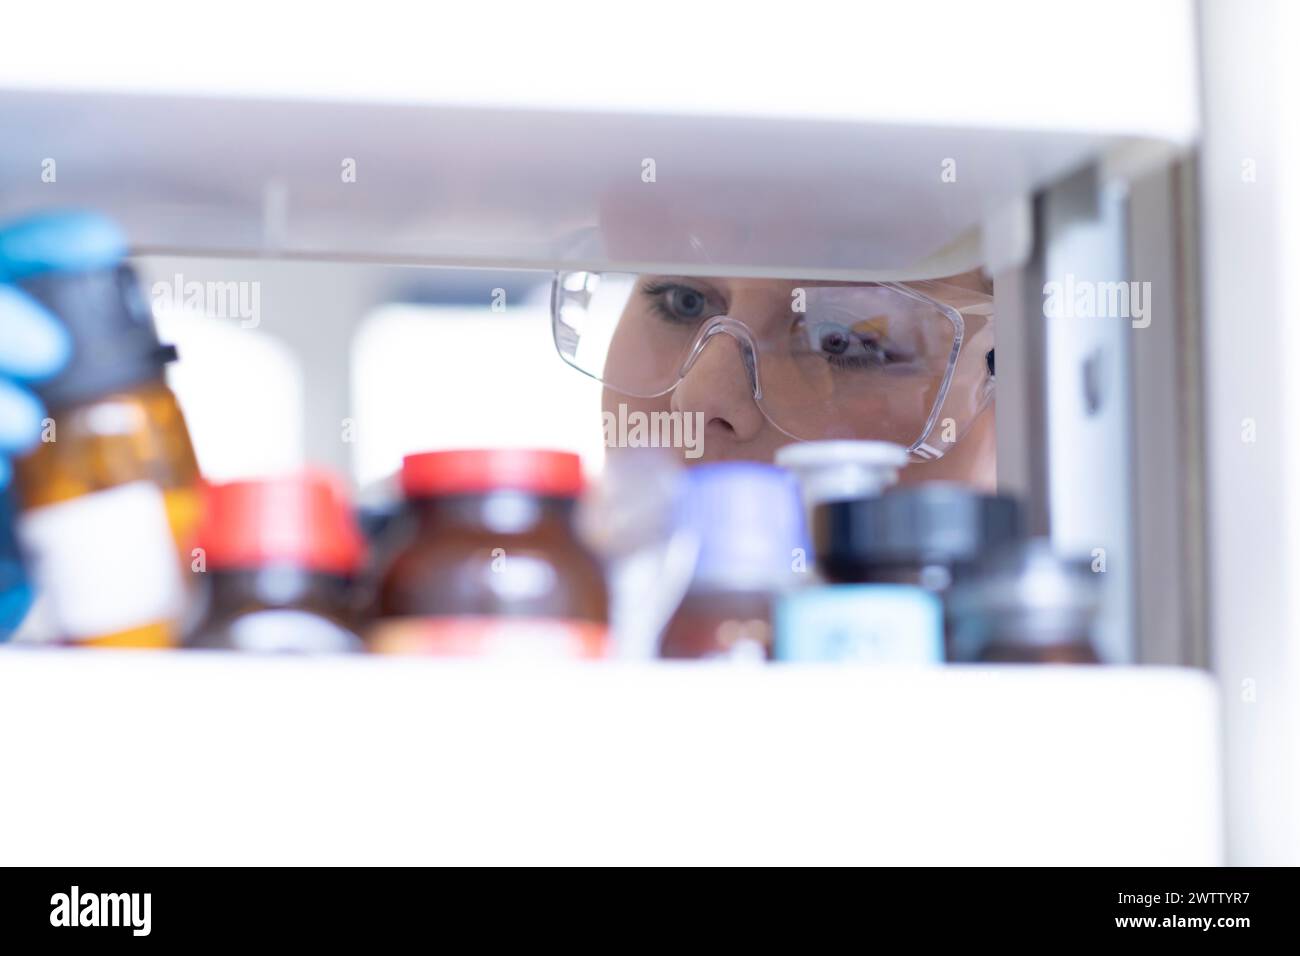 Curious scientist gazing at chemical samples in a laboratory fridge Stock Photo